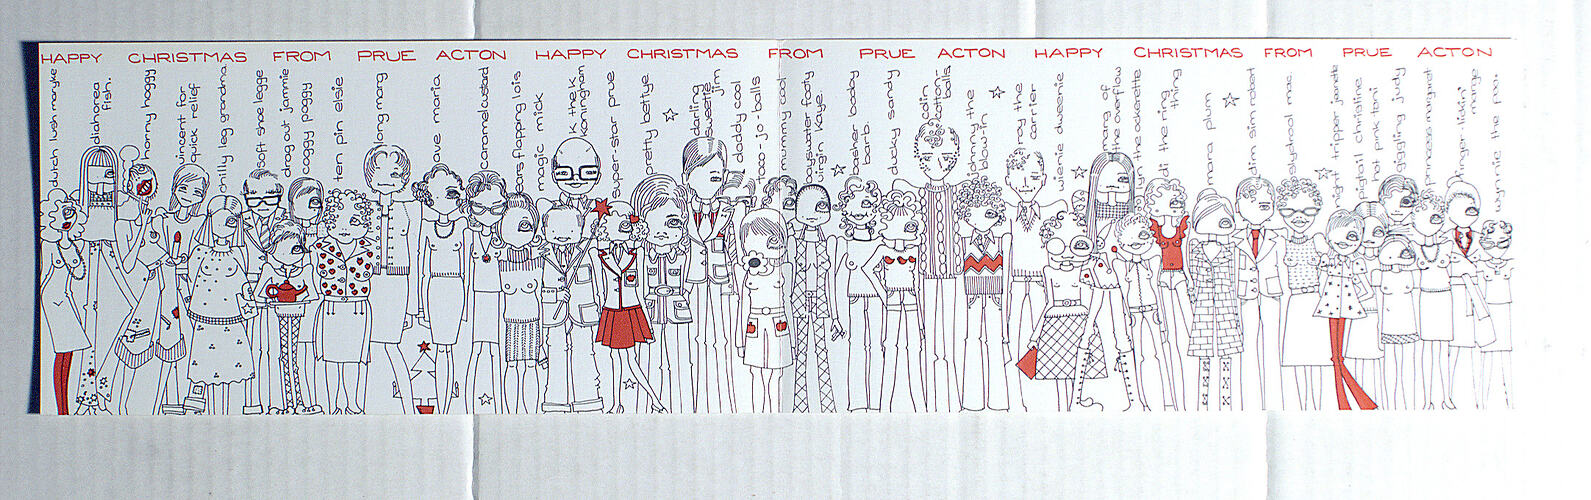 Christmas Card - Prue Acton [undated]